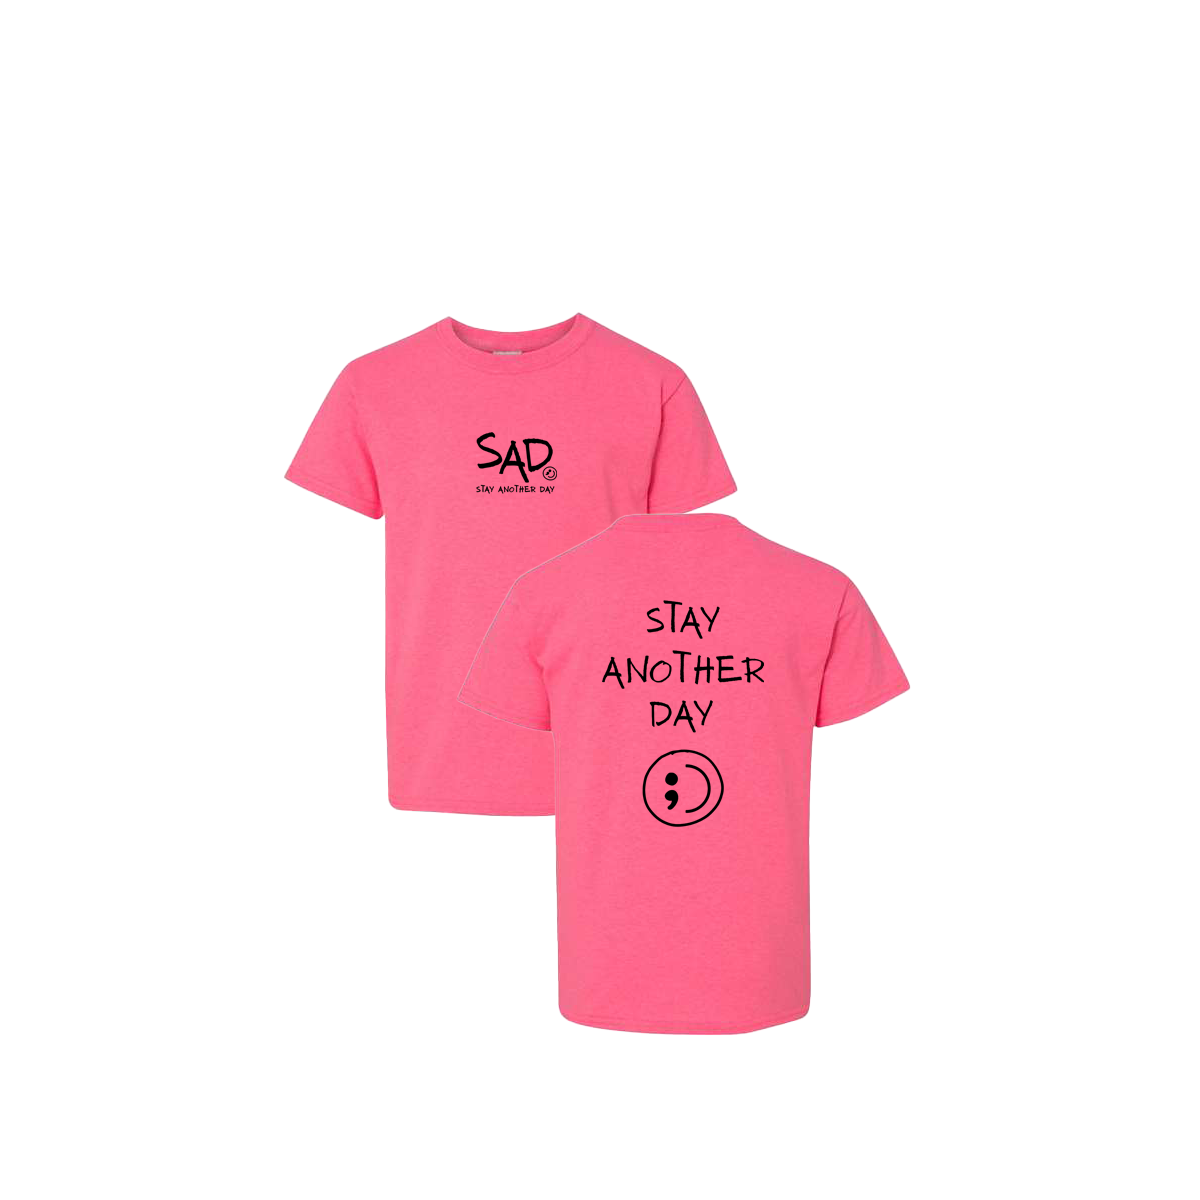 Stay Another Day Screen Printed Safety Pink Youth Tshirt